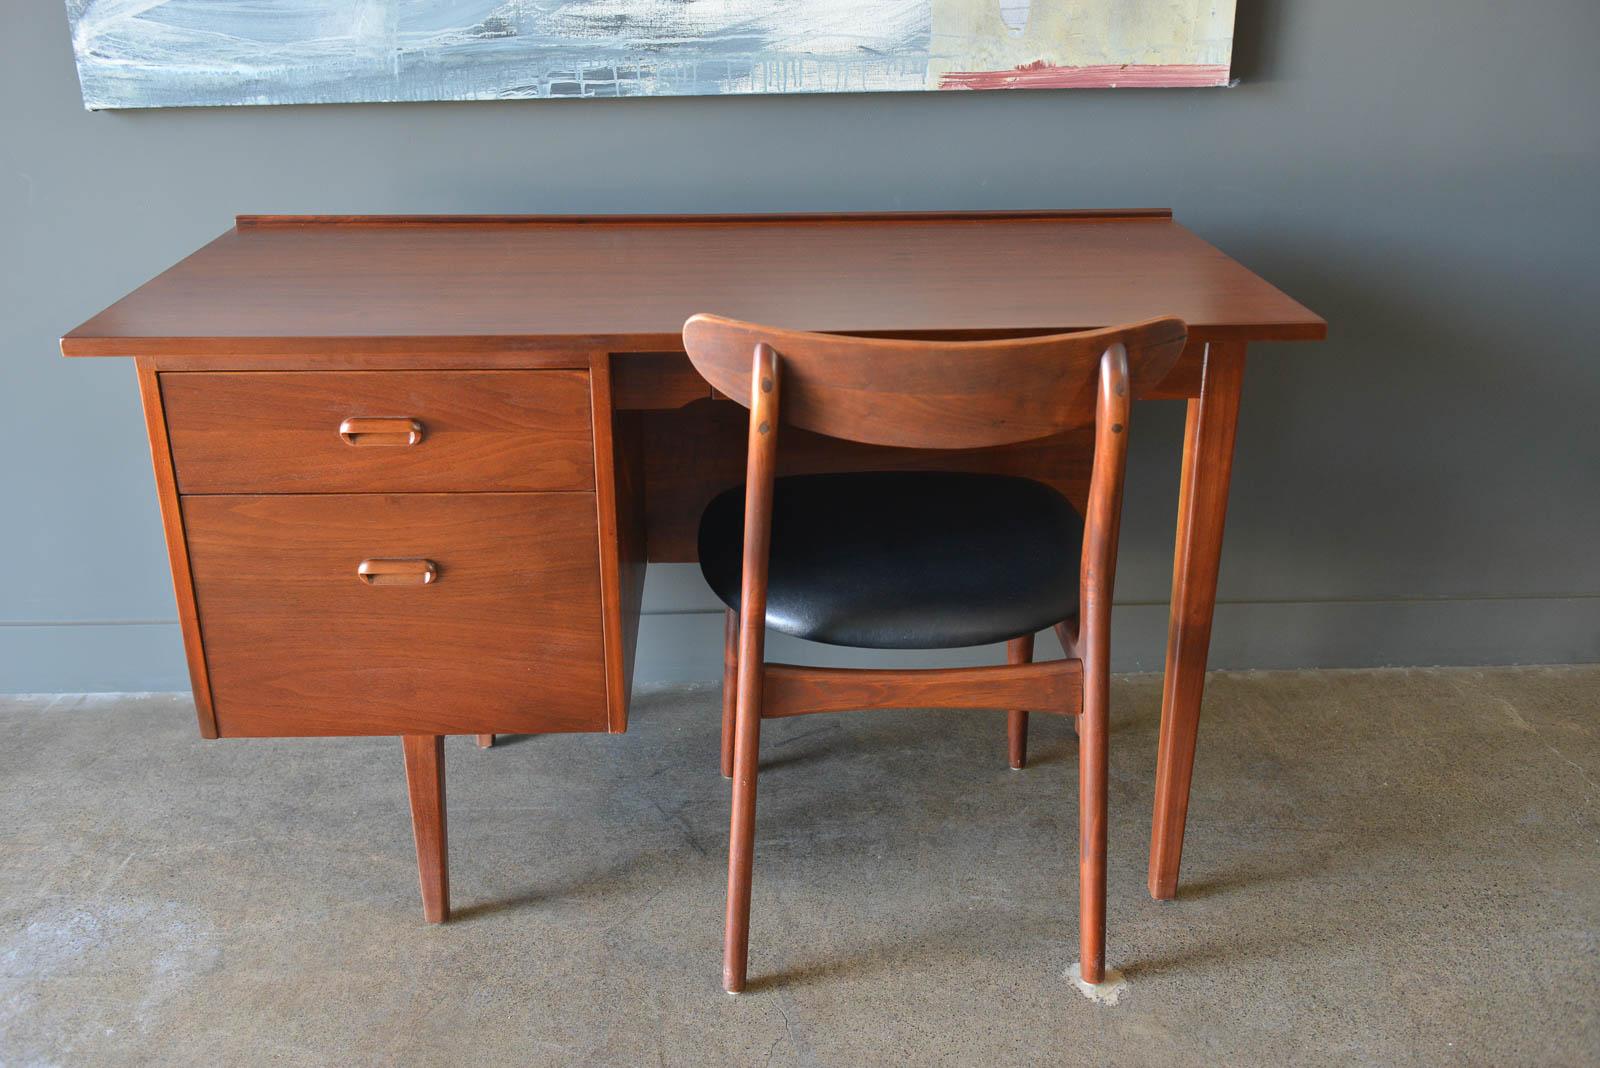 Mid-20th Century Walnut Desk by Jack Cartwright for Founders, circa 1960